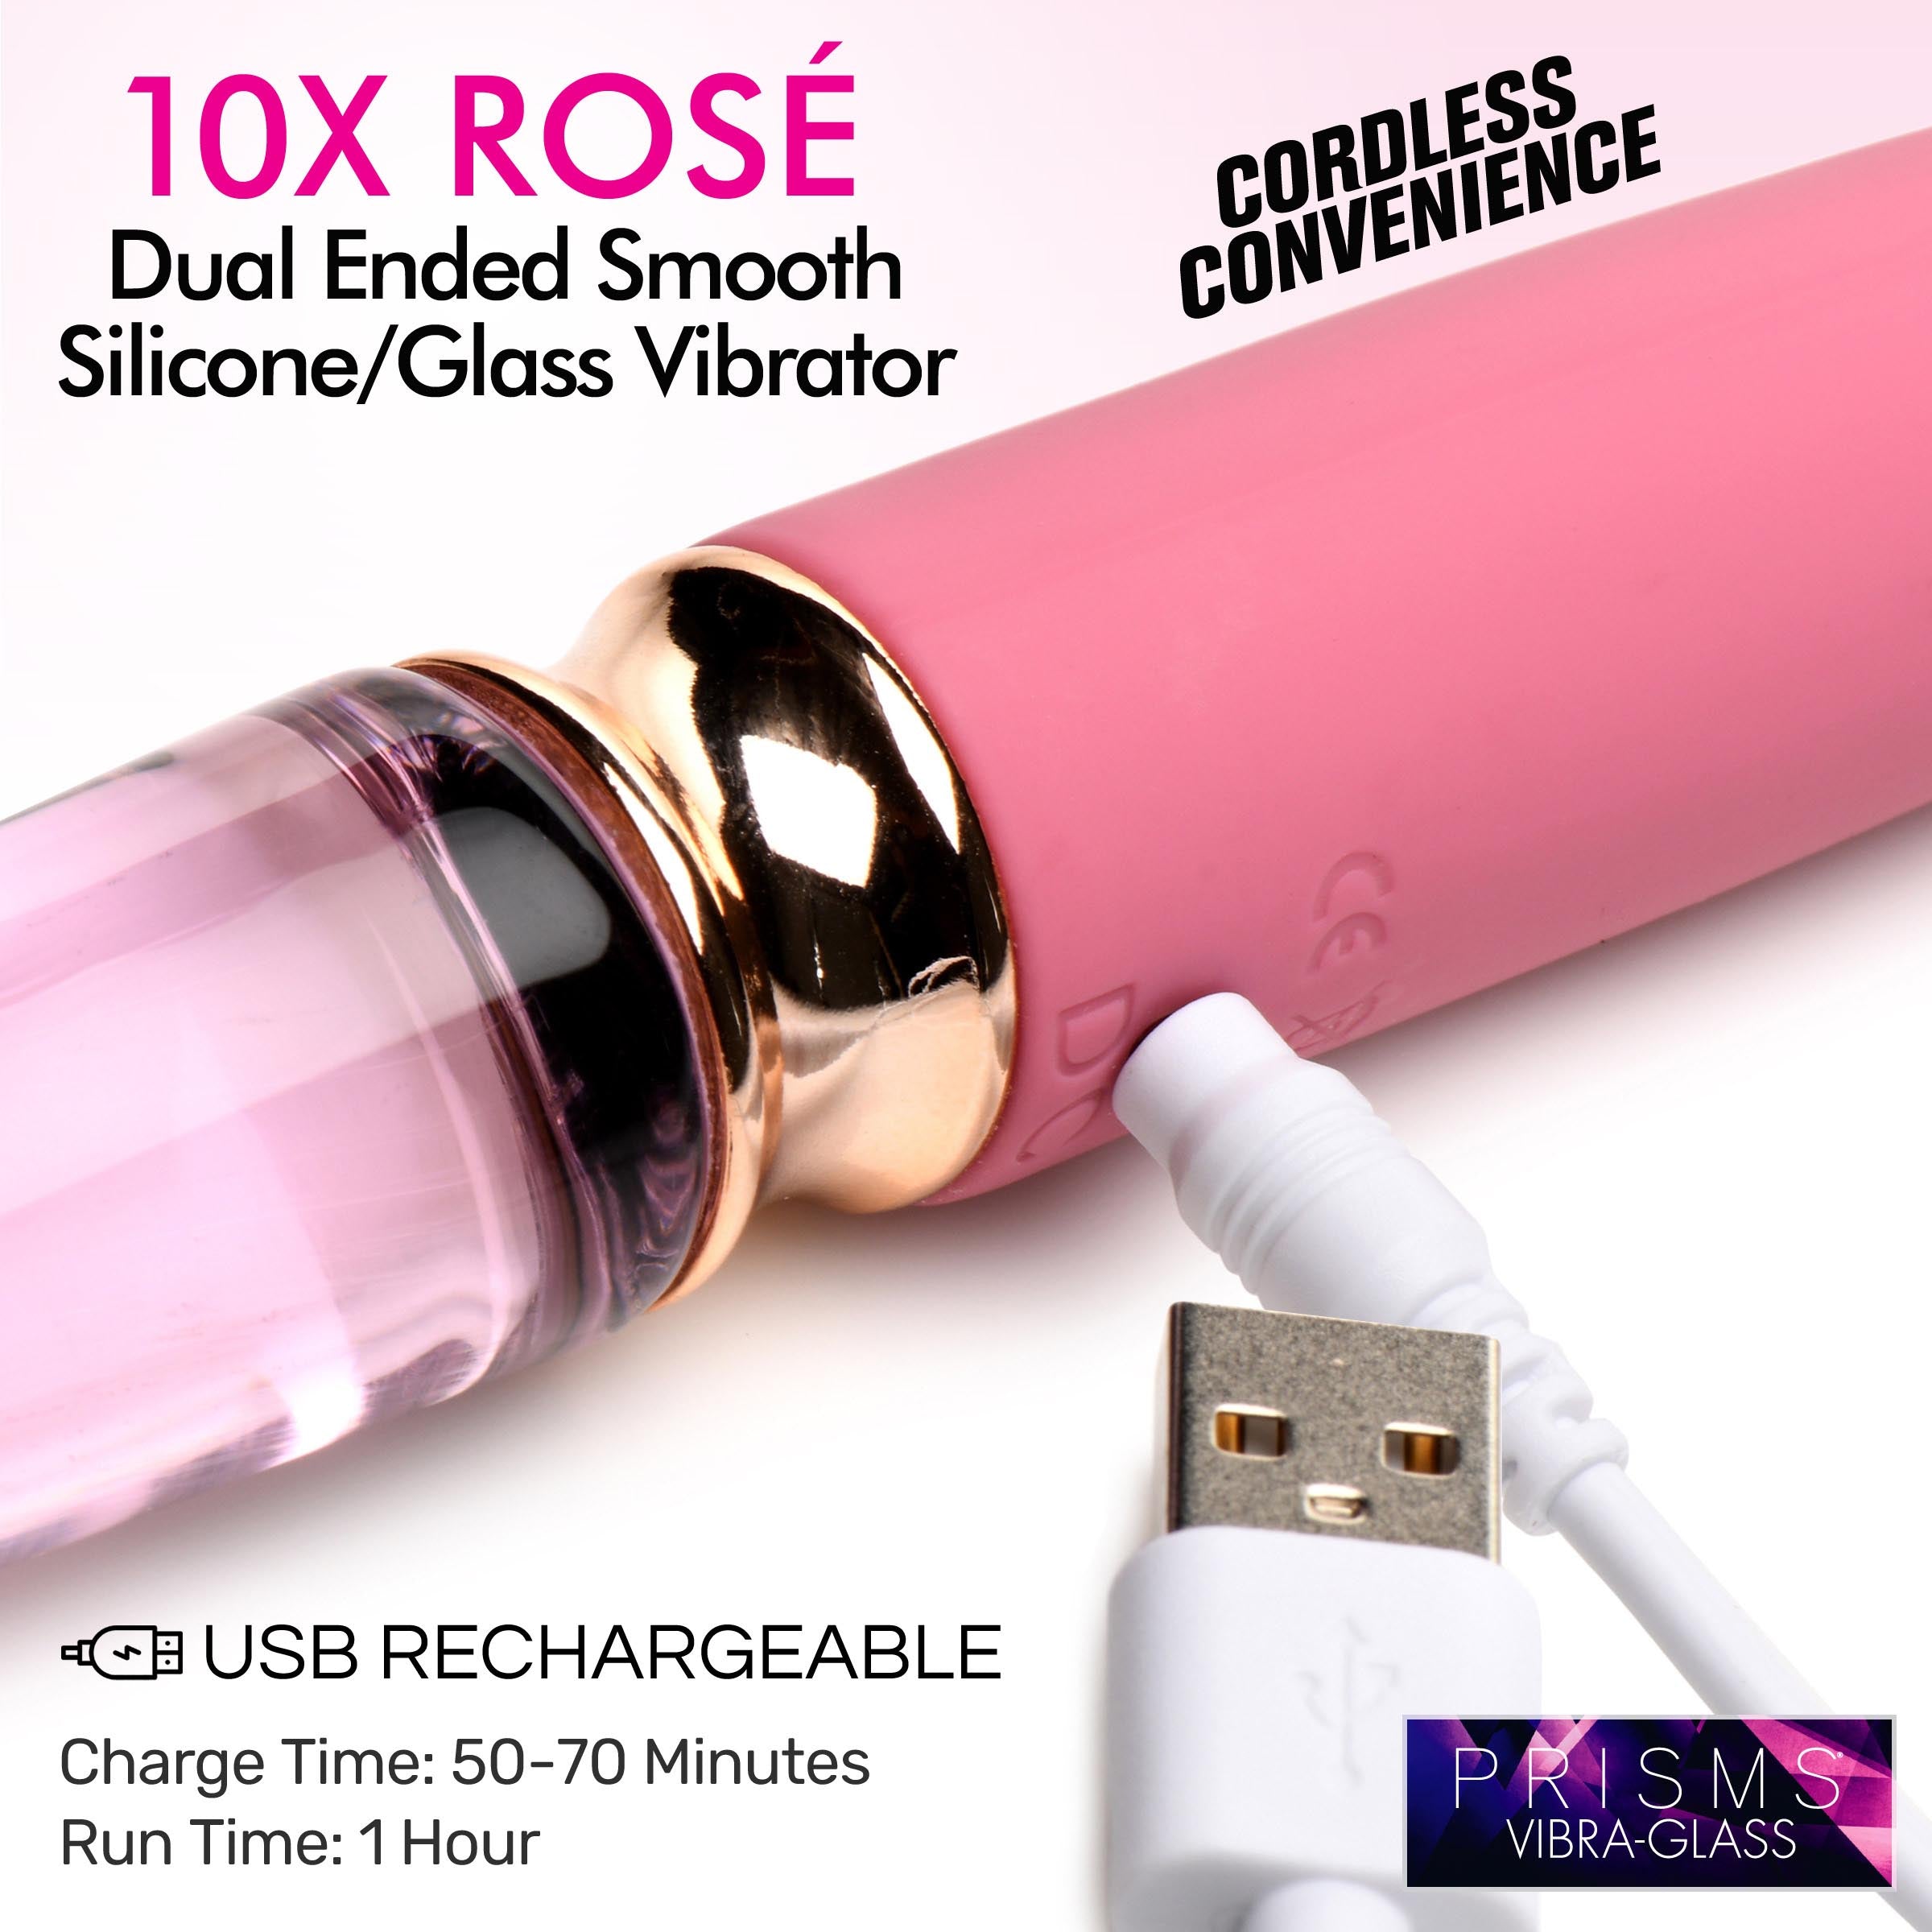 10X Rose Dual Ended Smooth Silicone and Glass Vibrator